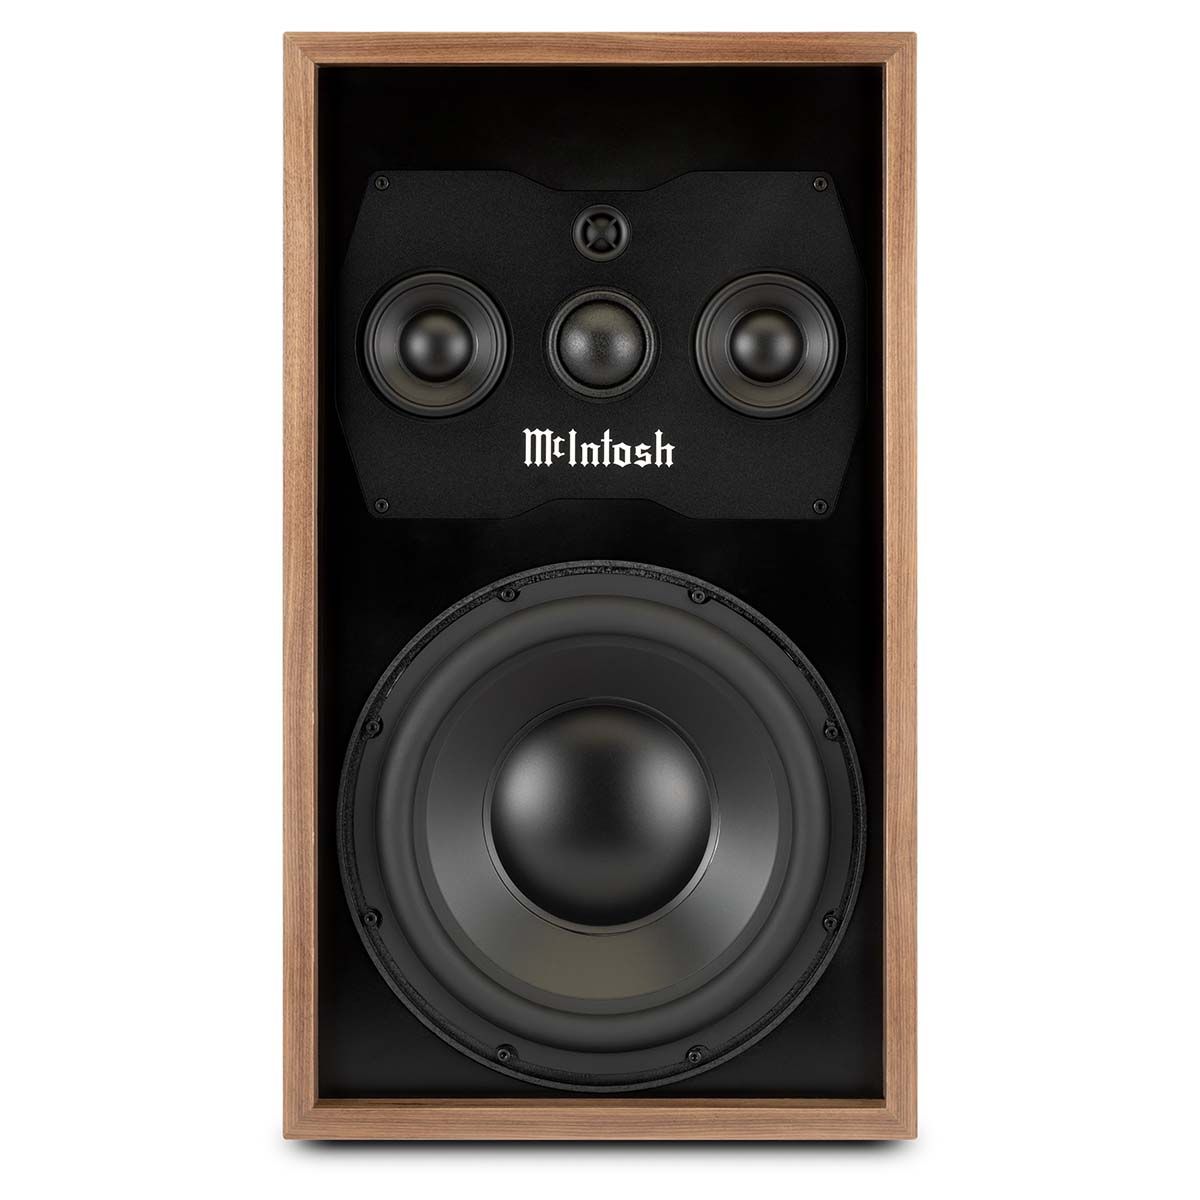 McIntosh ML1 Loudspeaker Mk II front view without grille or stand